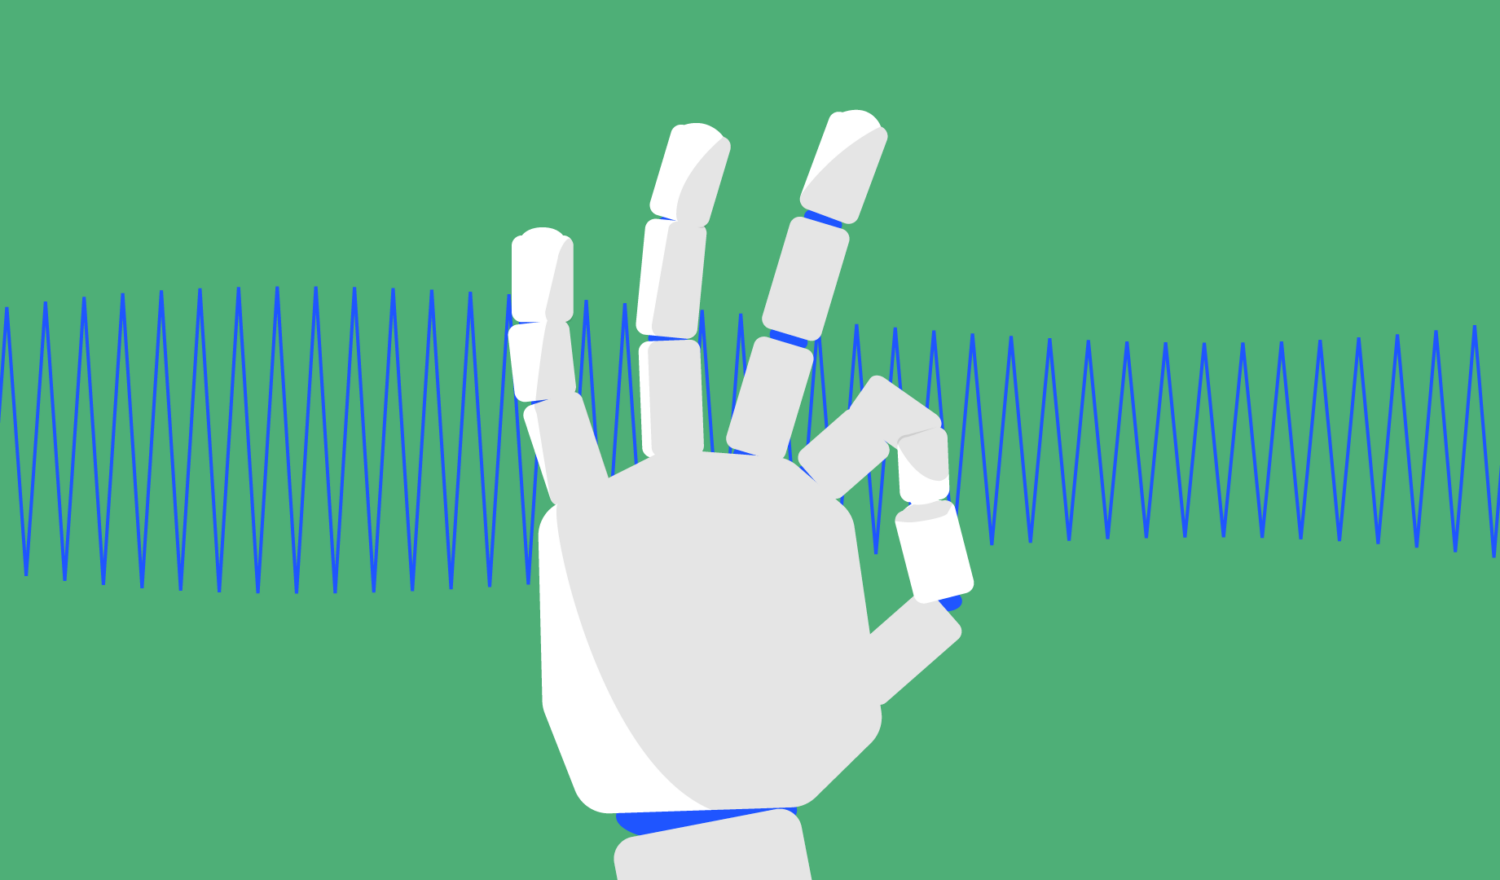 A robot hand closing thumb and index fingers with wavelengths in the background